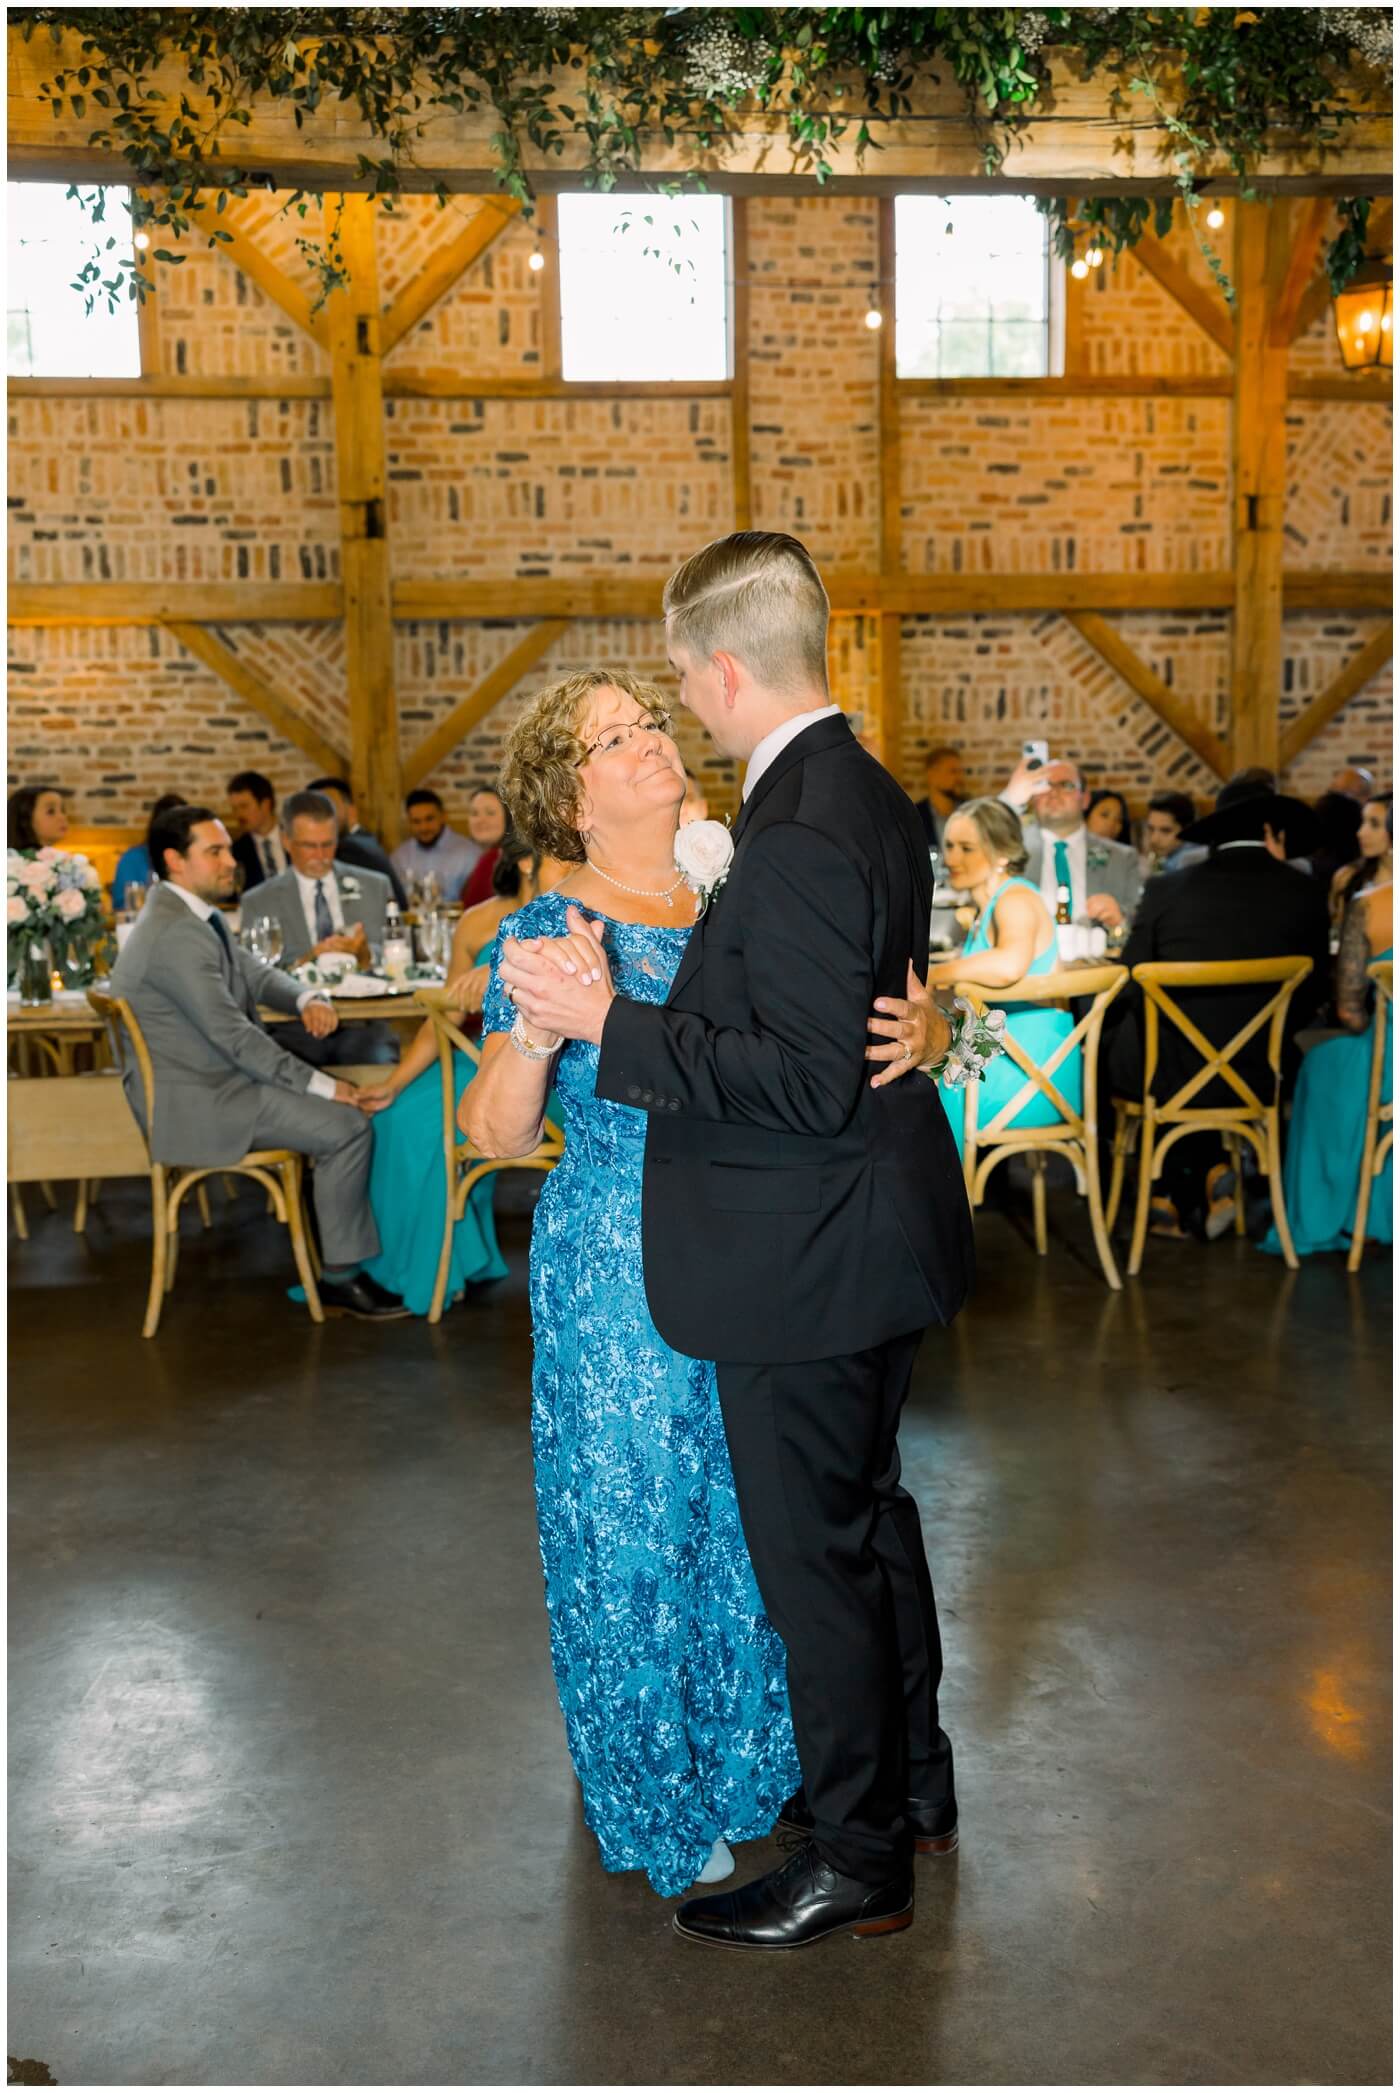 The groom smiles at his mom as they dance together on his wedding day 